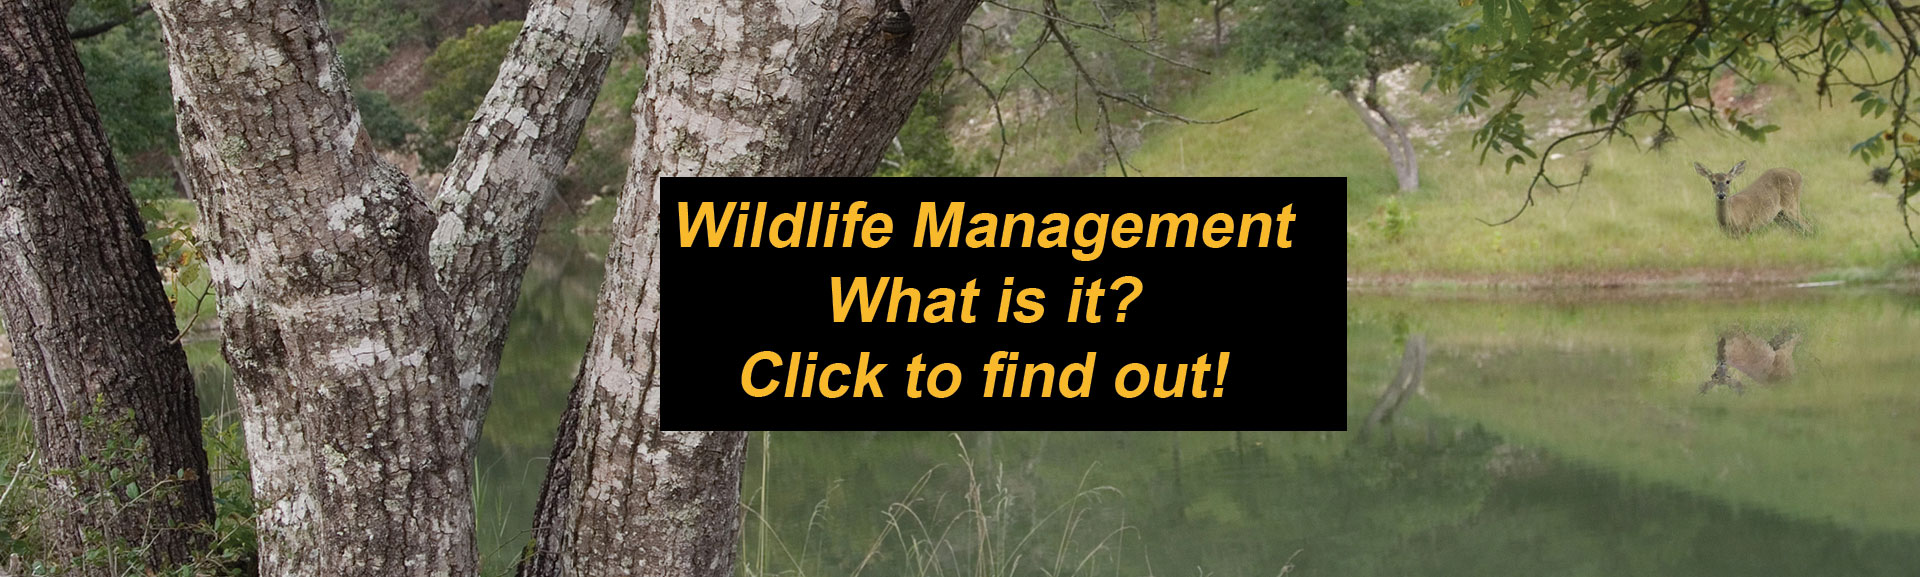 Wildlife Management -What is it? Explains what wildlife management is and is not.